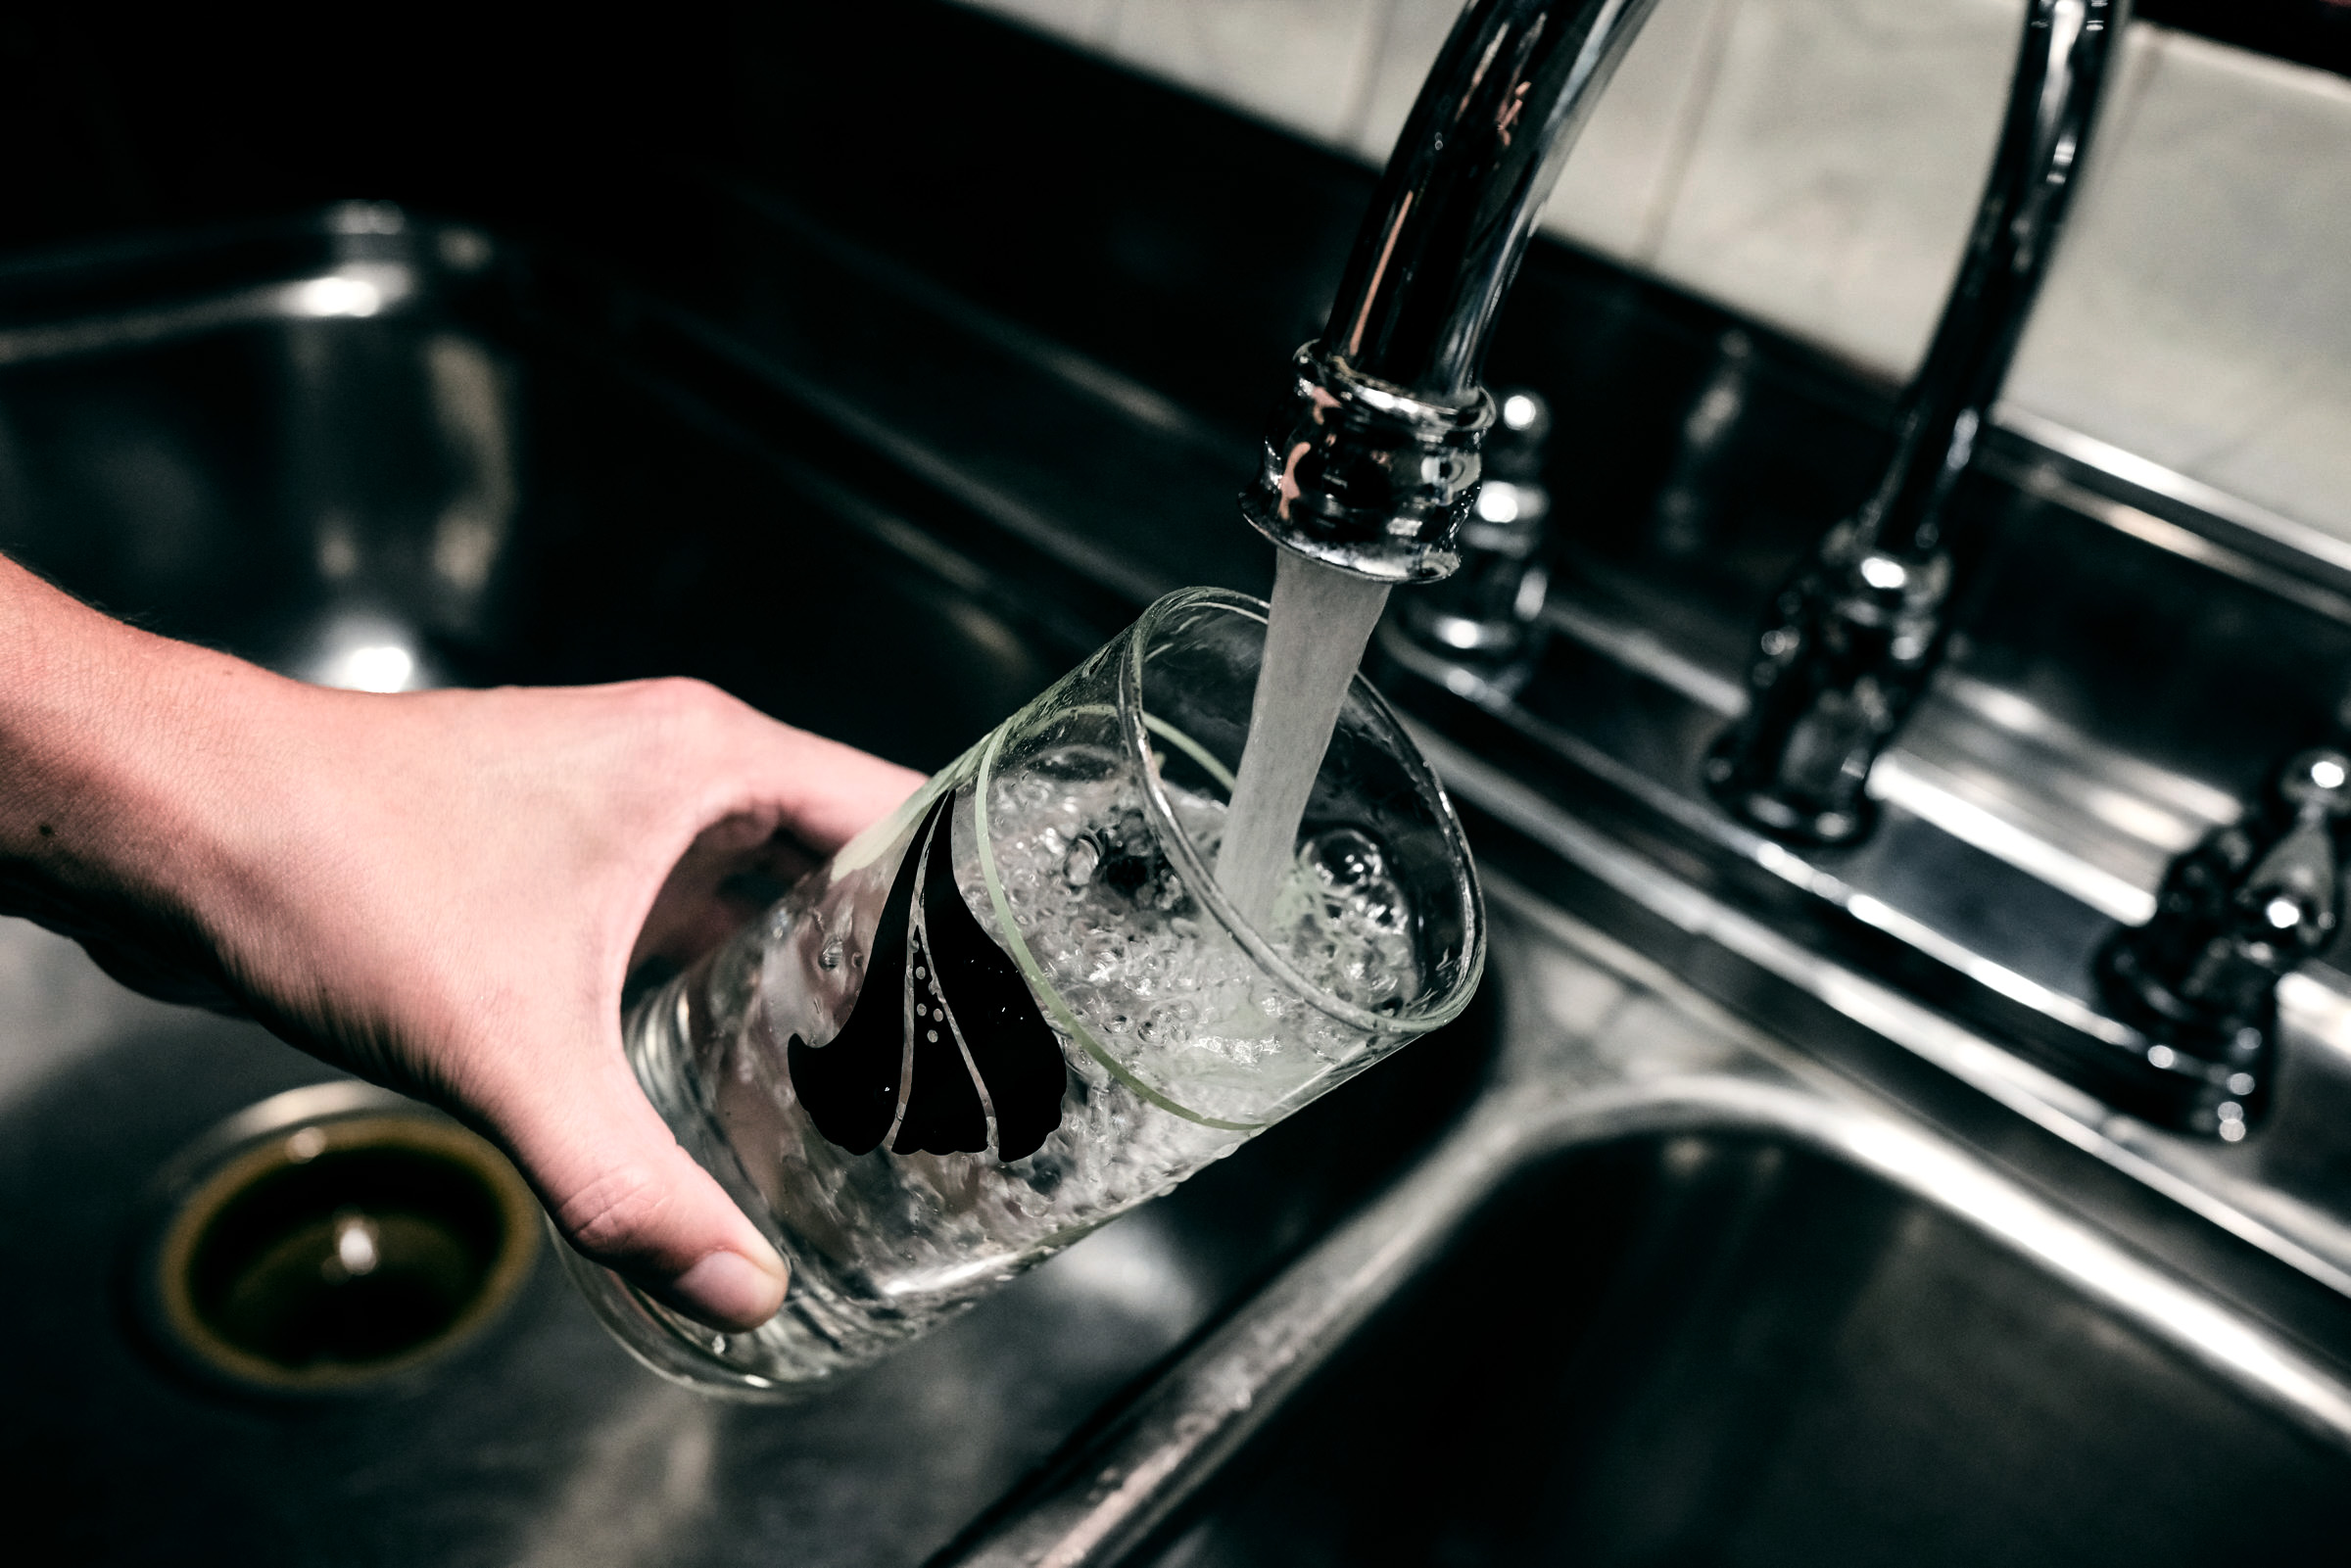 At Least 45 Percent of US Tap Water Contaminated With PFAS “Forever Chemicals”